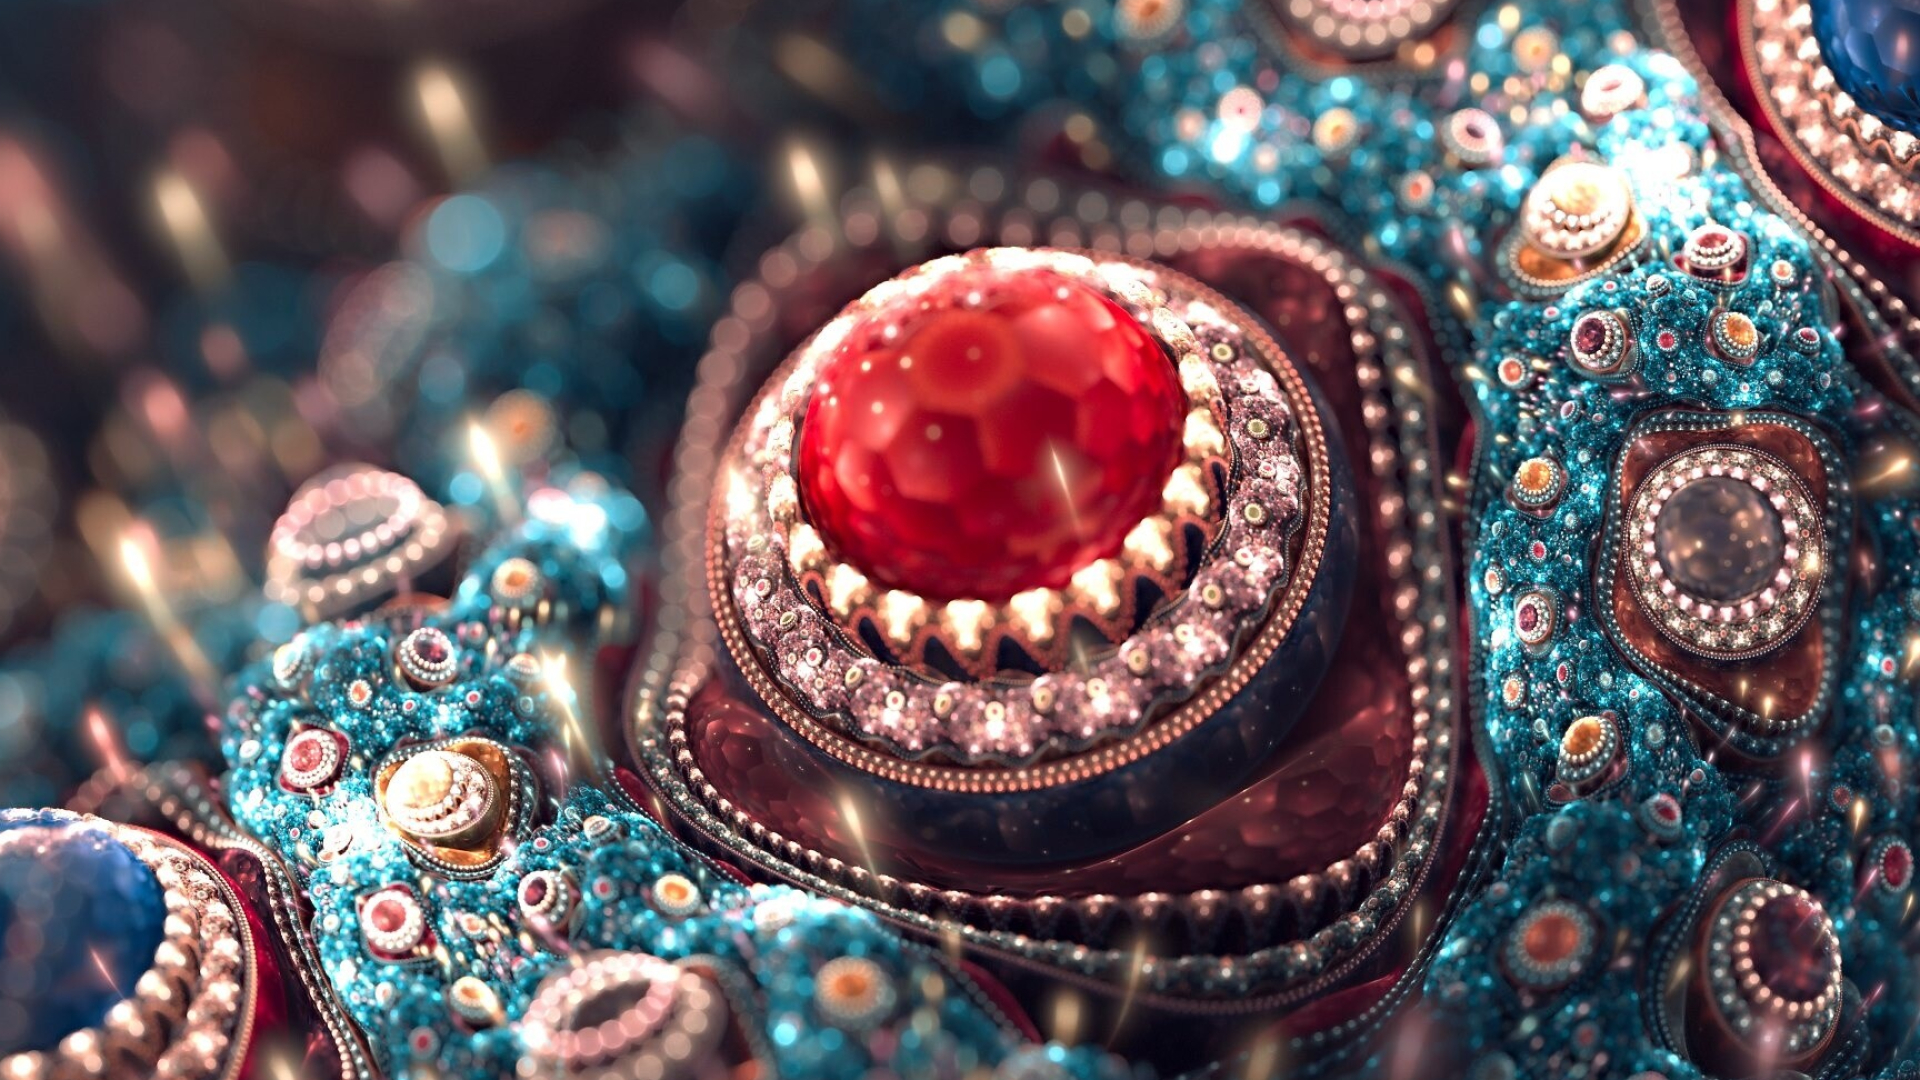 Gemstone: Diamond, Ruby, Jewel, Minerals that have been chosen for their beauty and durability. 1920x1080 Full HD Wallpaper.